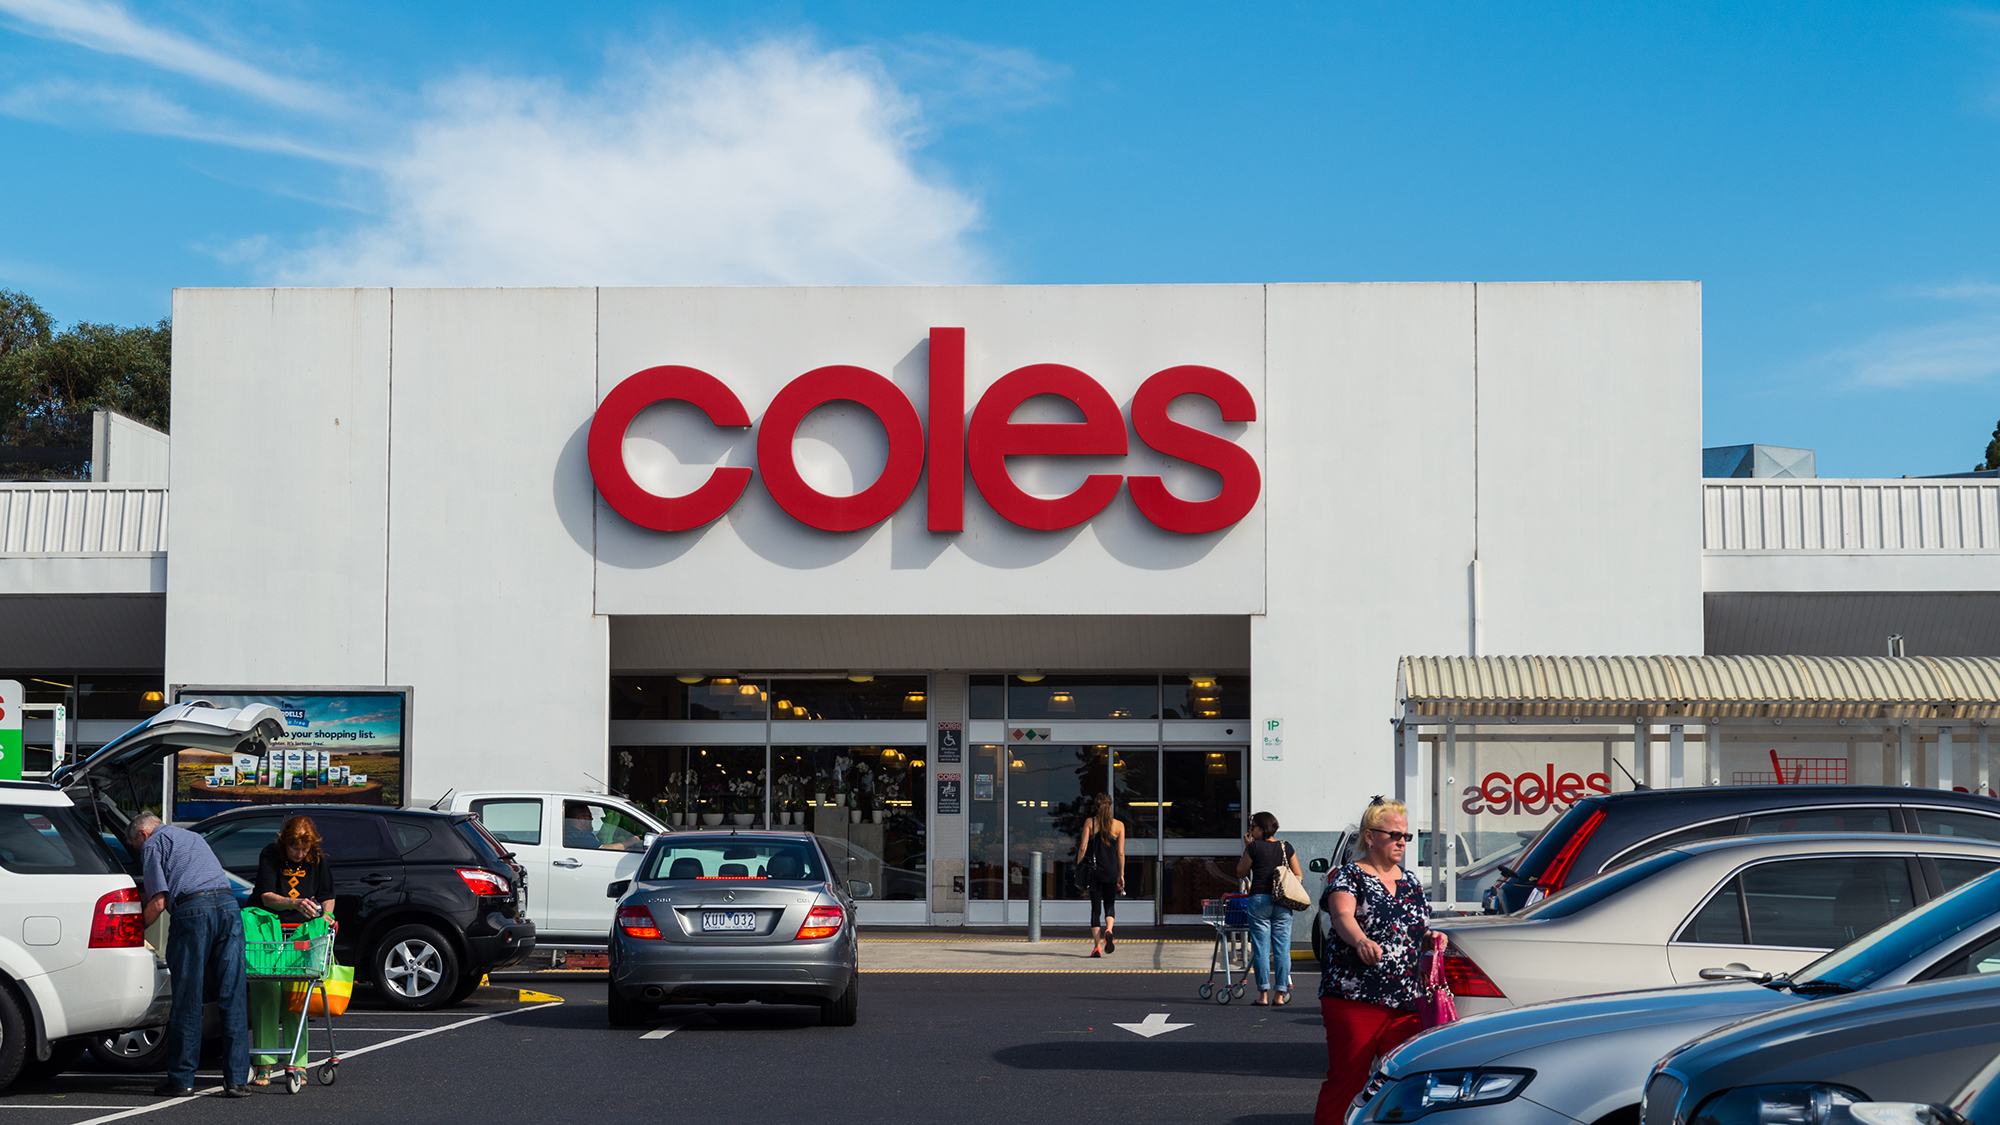 Here's how to get free money from Coles